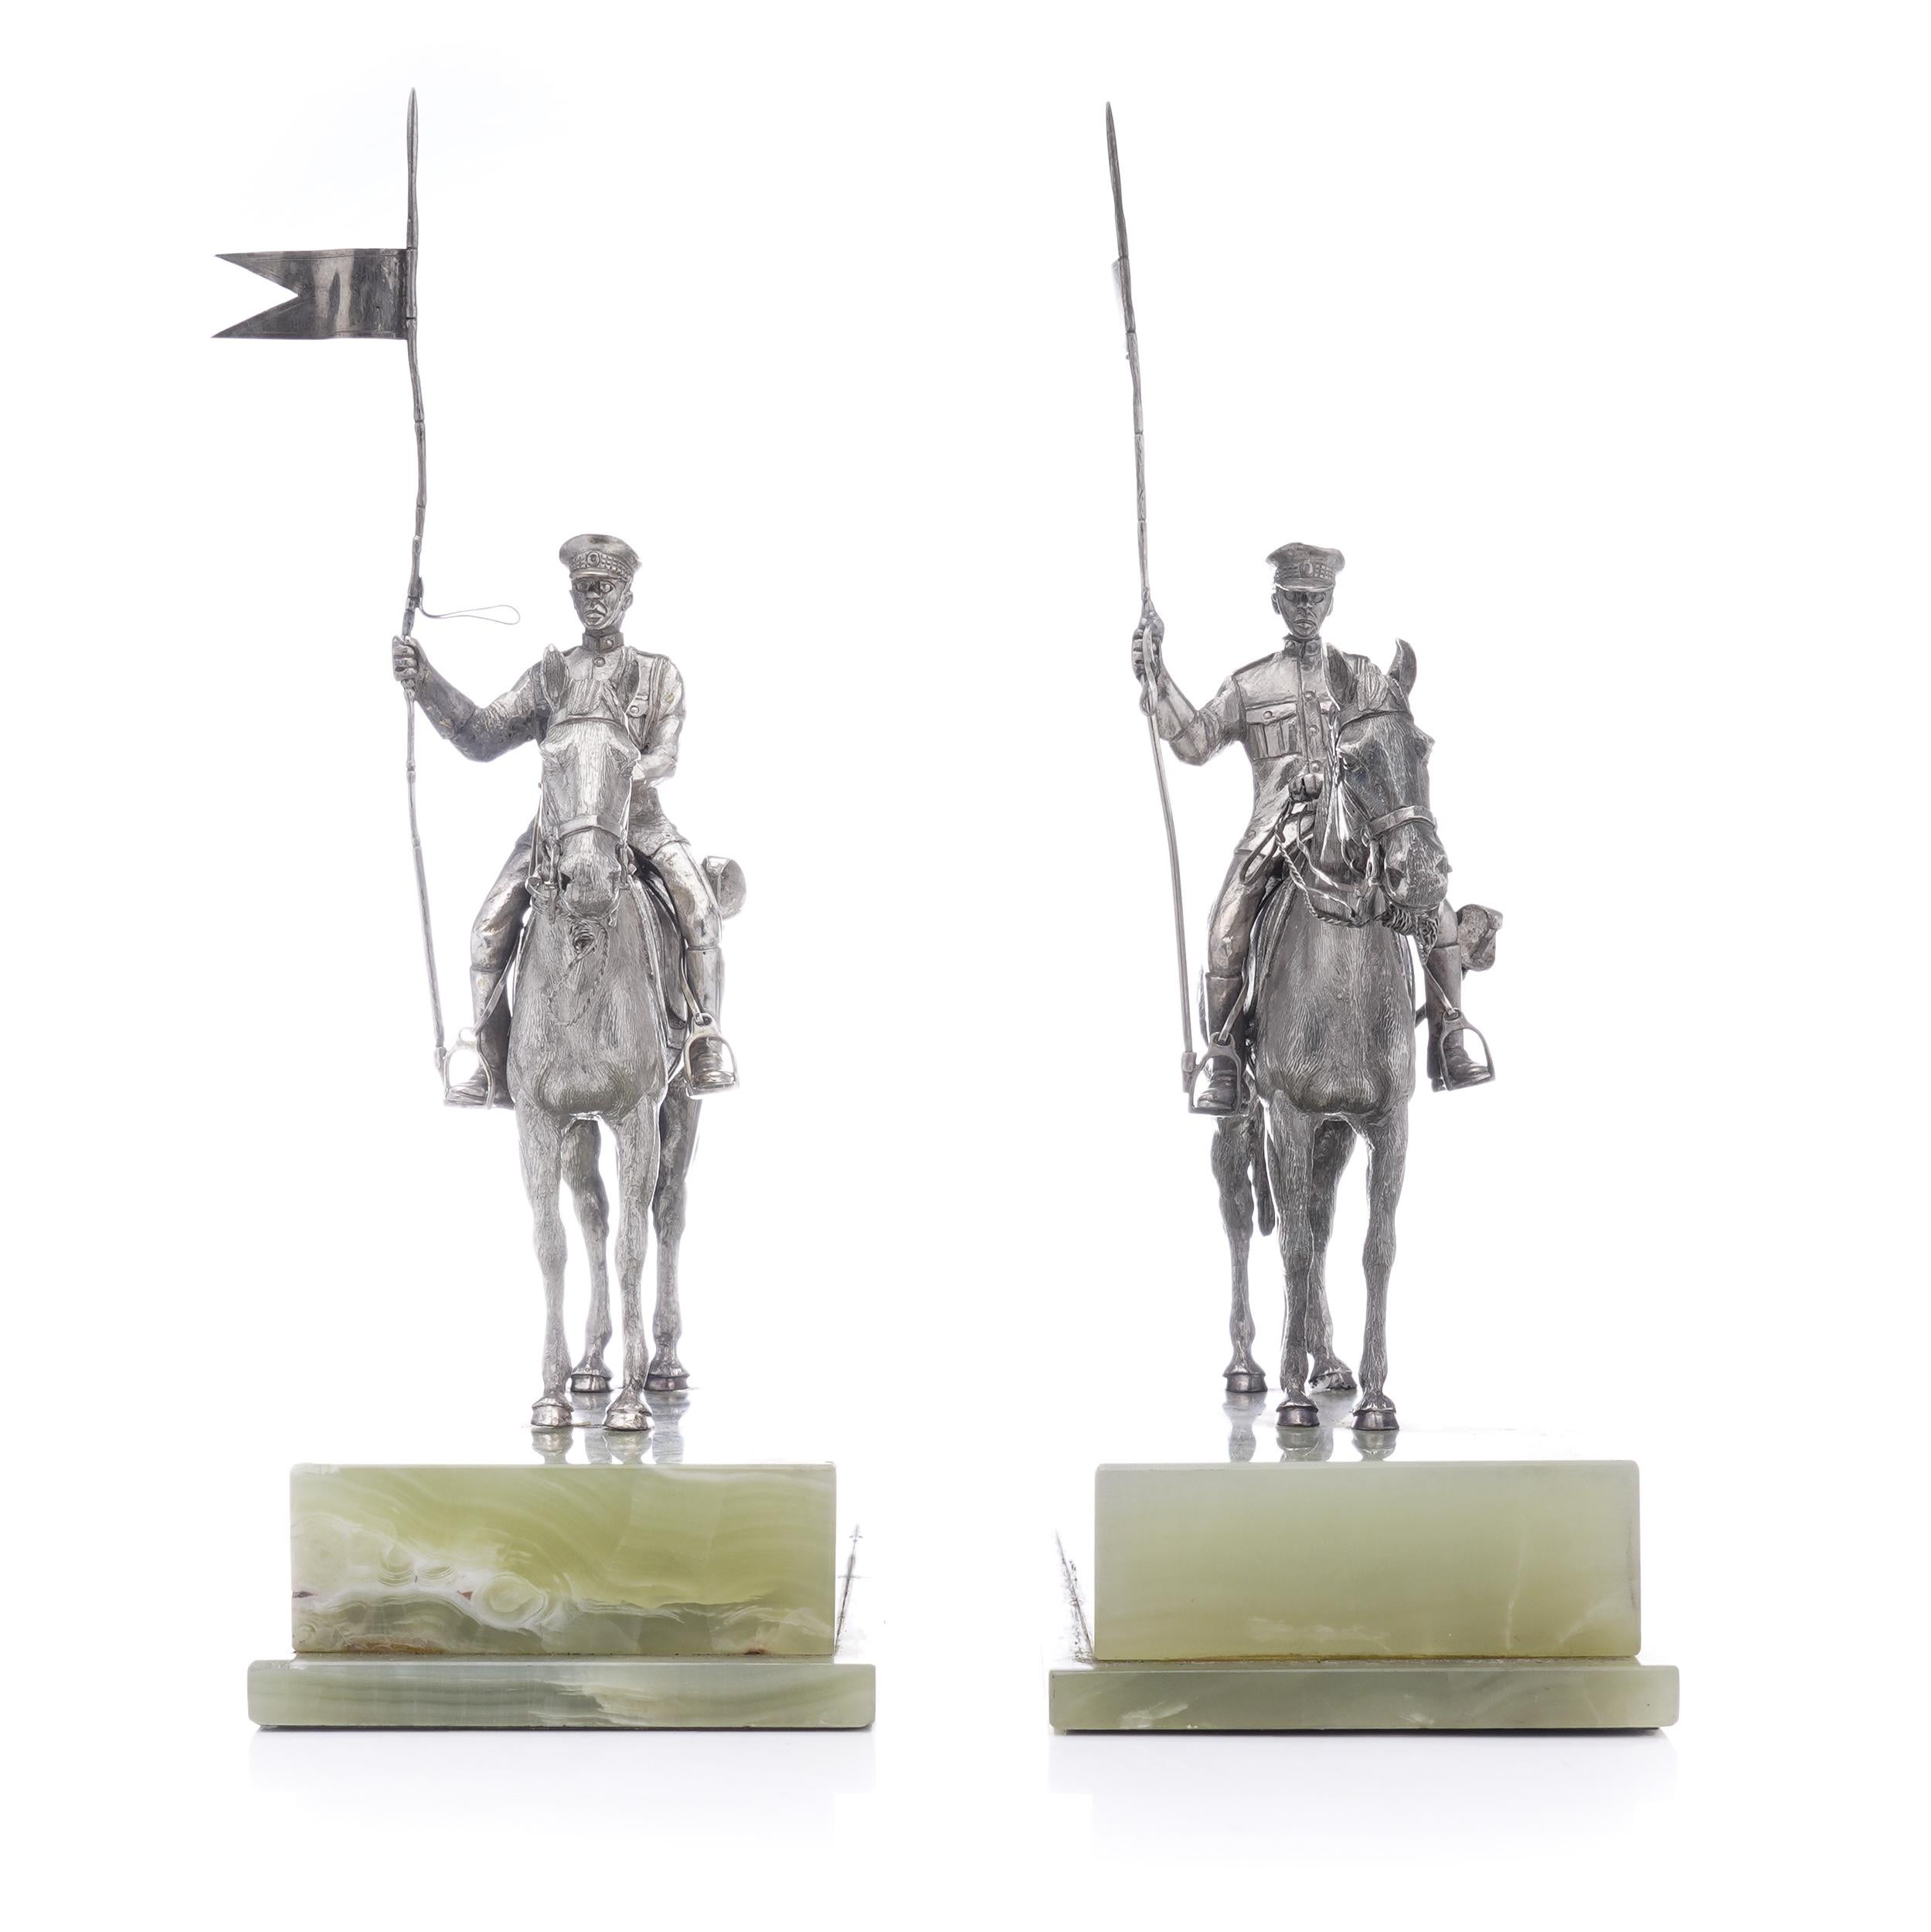 Asprey Pair or Horseriding Solid Silver Figurines on Marble Bases, London, 1977 For Sale 5